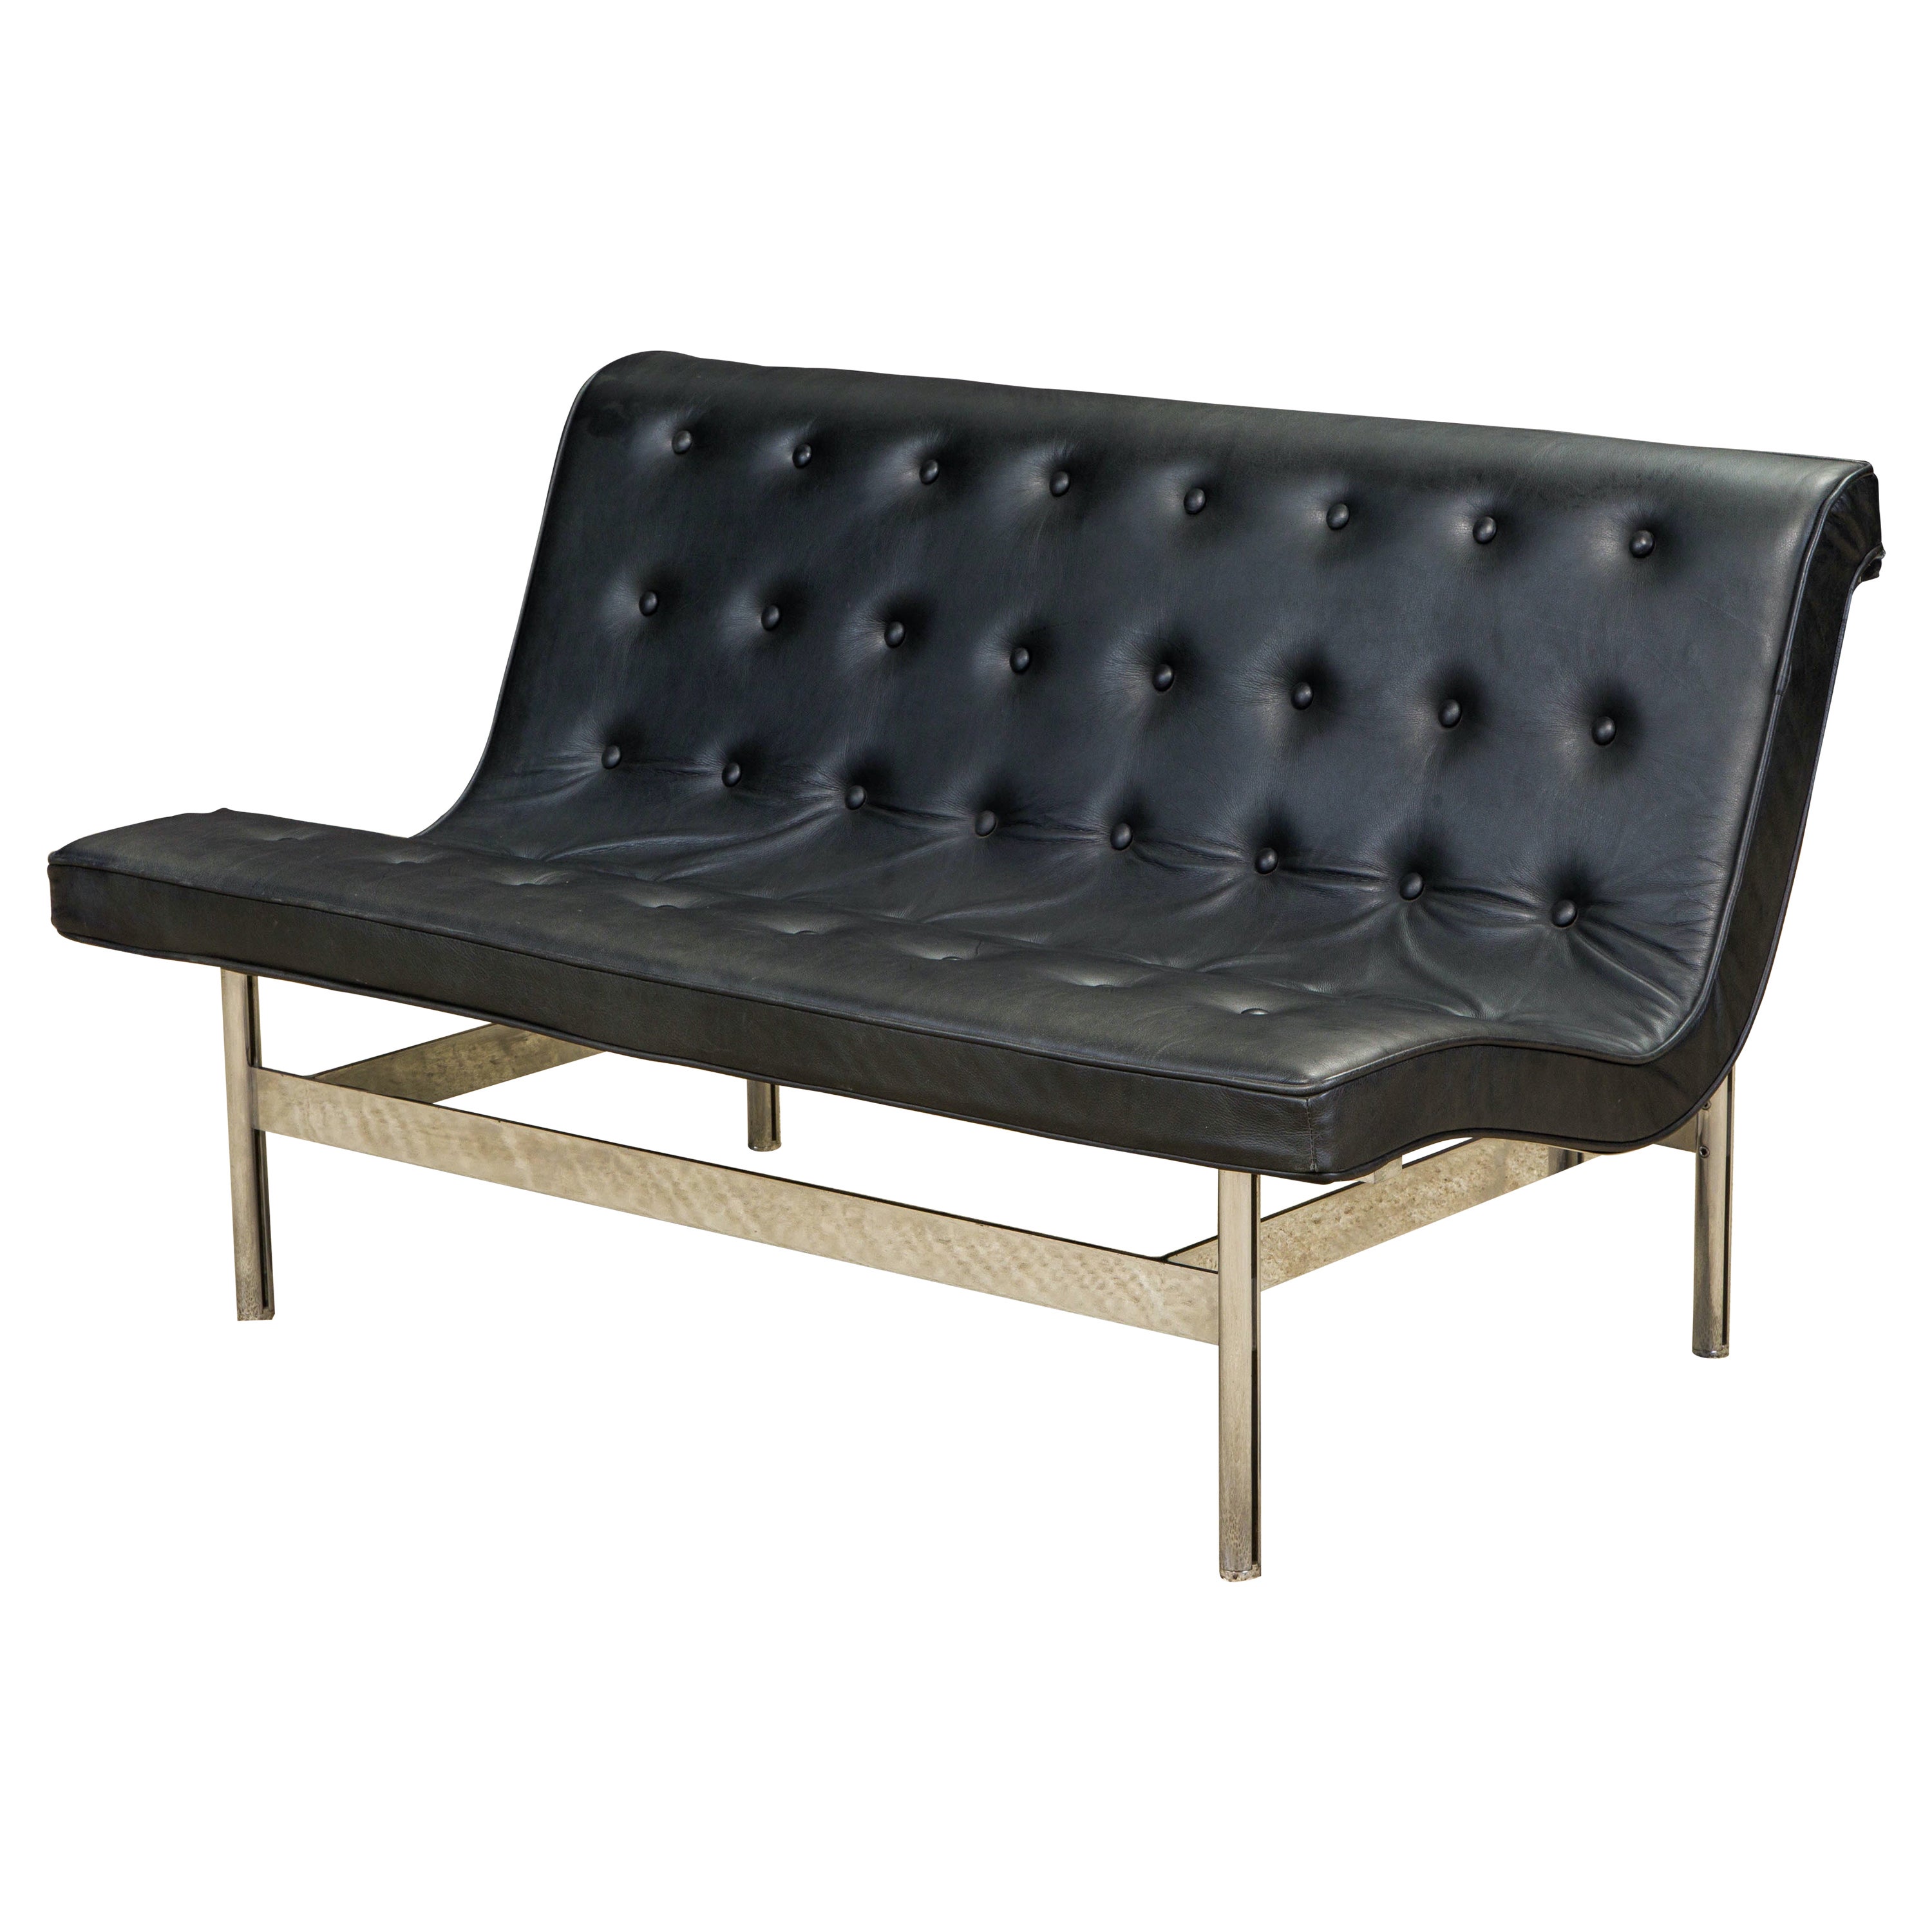 'New York' Settee by Katavolos, Littell and Kelley for Laverne Intl, c. 1952 For Sale